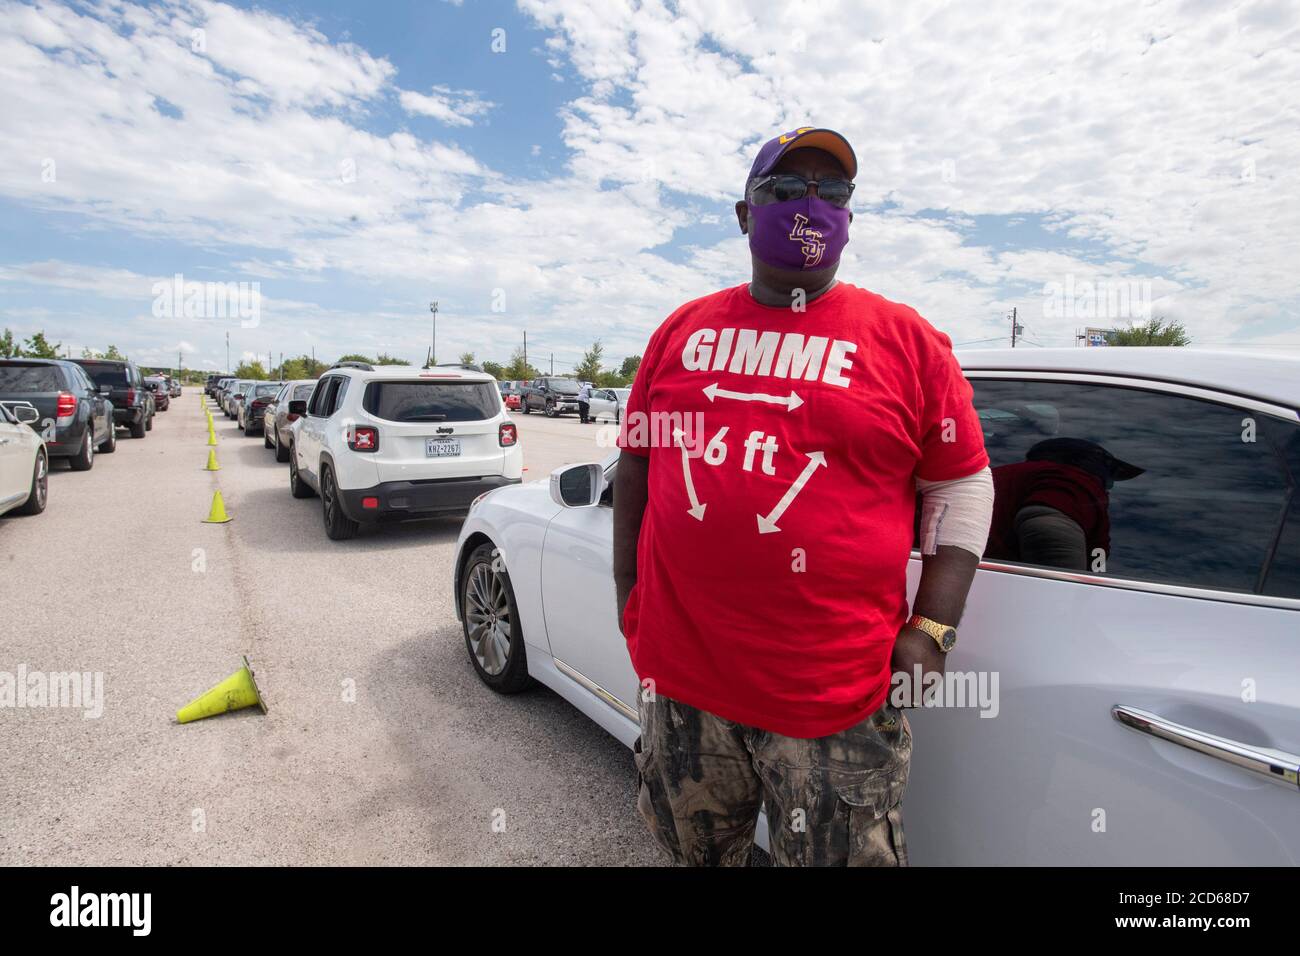 Austin, TX USA August 26, 2020: Hundreds of cars from coastal east Texas and southwest Louisiana wait in line at a Hurricane Laura evacuation center at the Circuit of the Americas race track parking areas. After spending hours in his car, Ronnie Ruffin of Lake Charles, LA, gets some fresh air while wearing a mask and a 'Gimme 6 feet' tee shirt. Laura is expected to make landfall overnight as a Category 4 storm and wreak havoc along the Texas and Louisiana coasts and inland. Credit: Bob Daemmrich/Alamy Live News Stock Photo